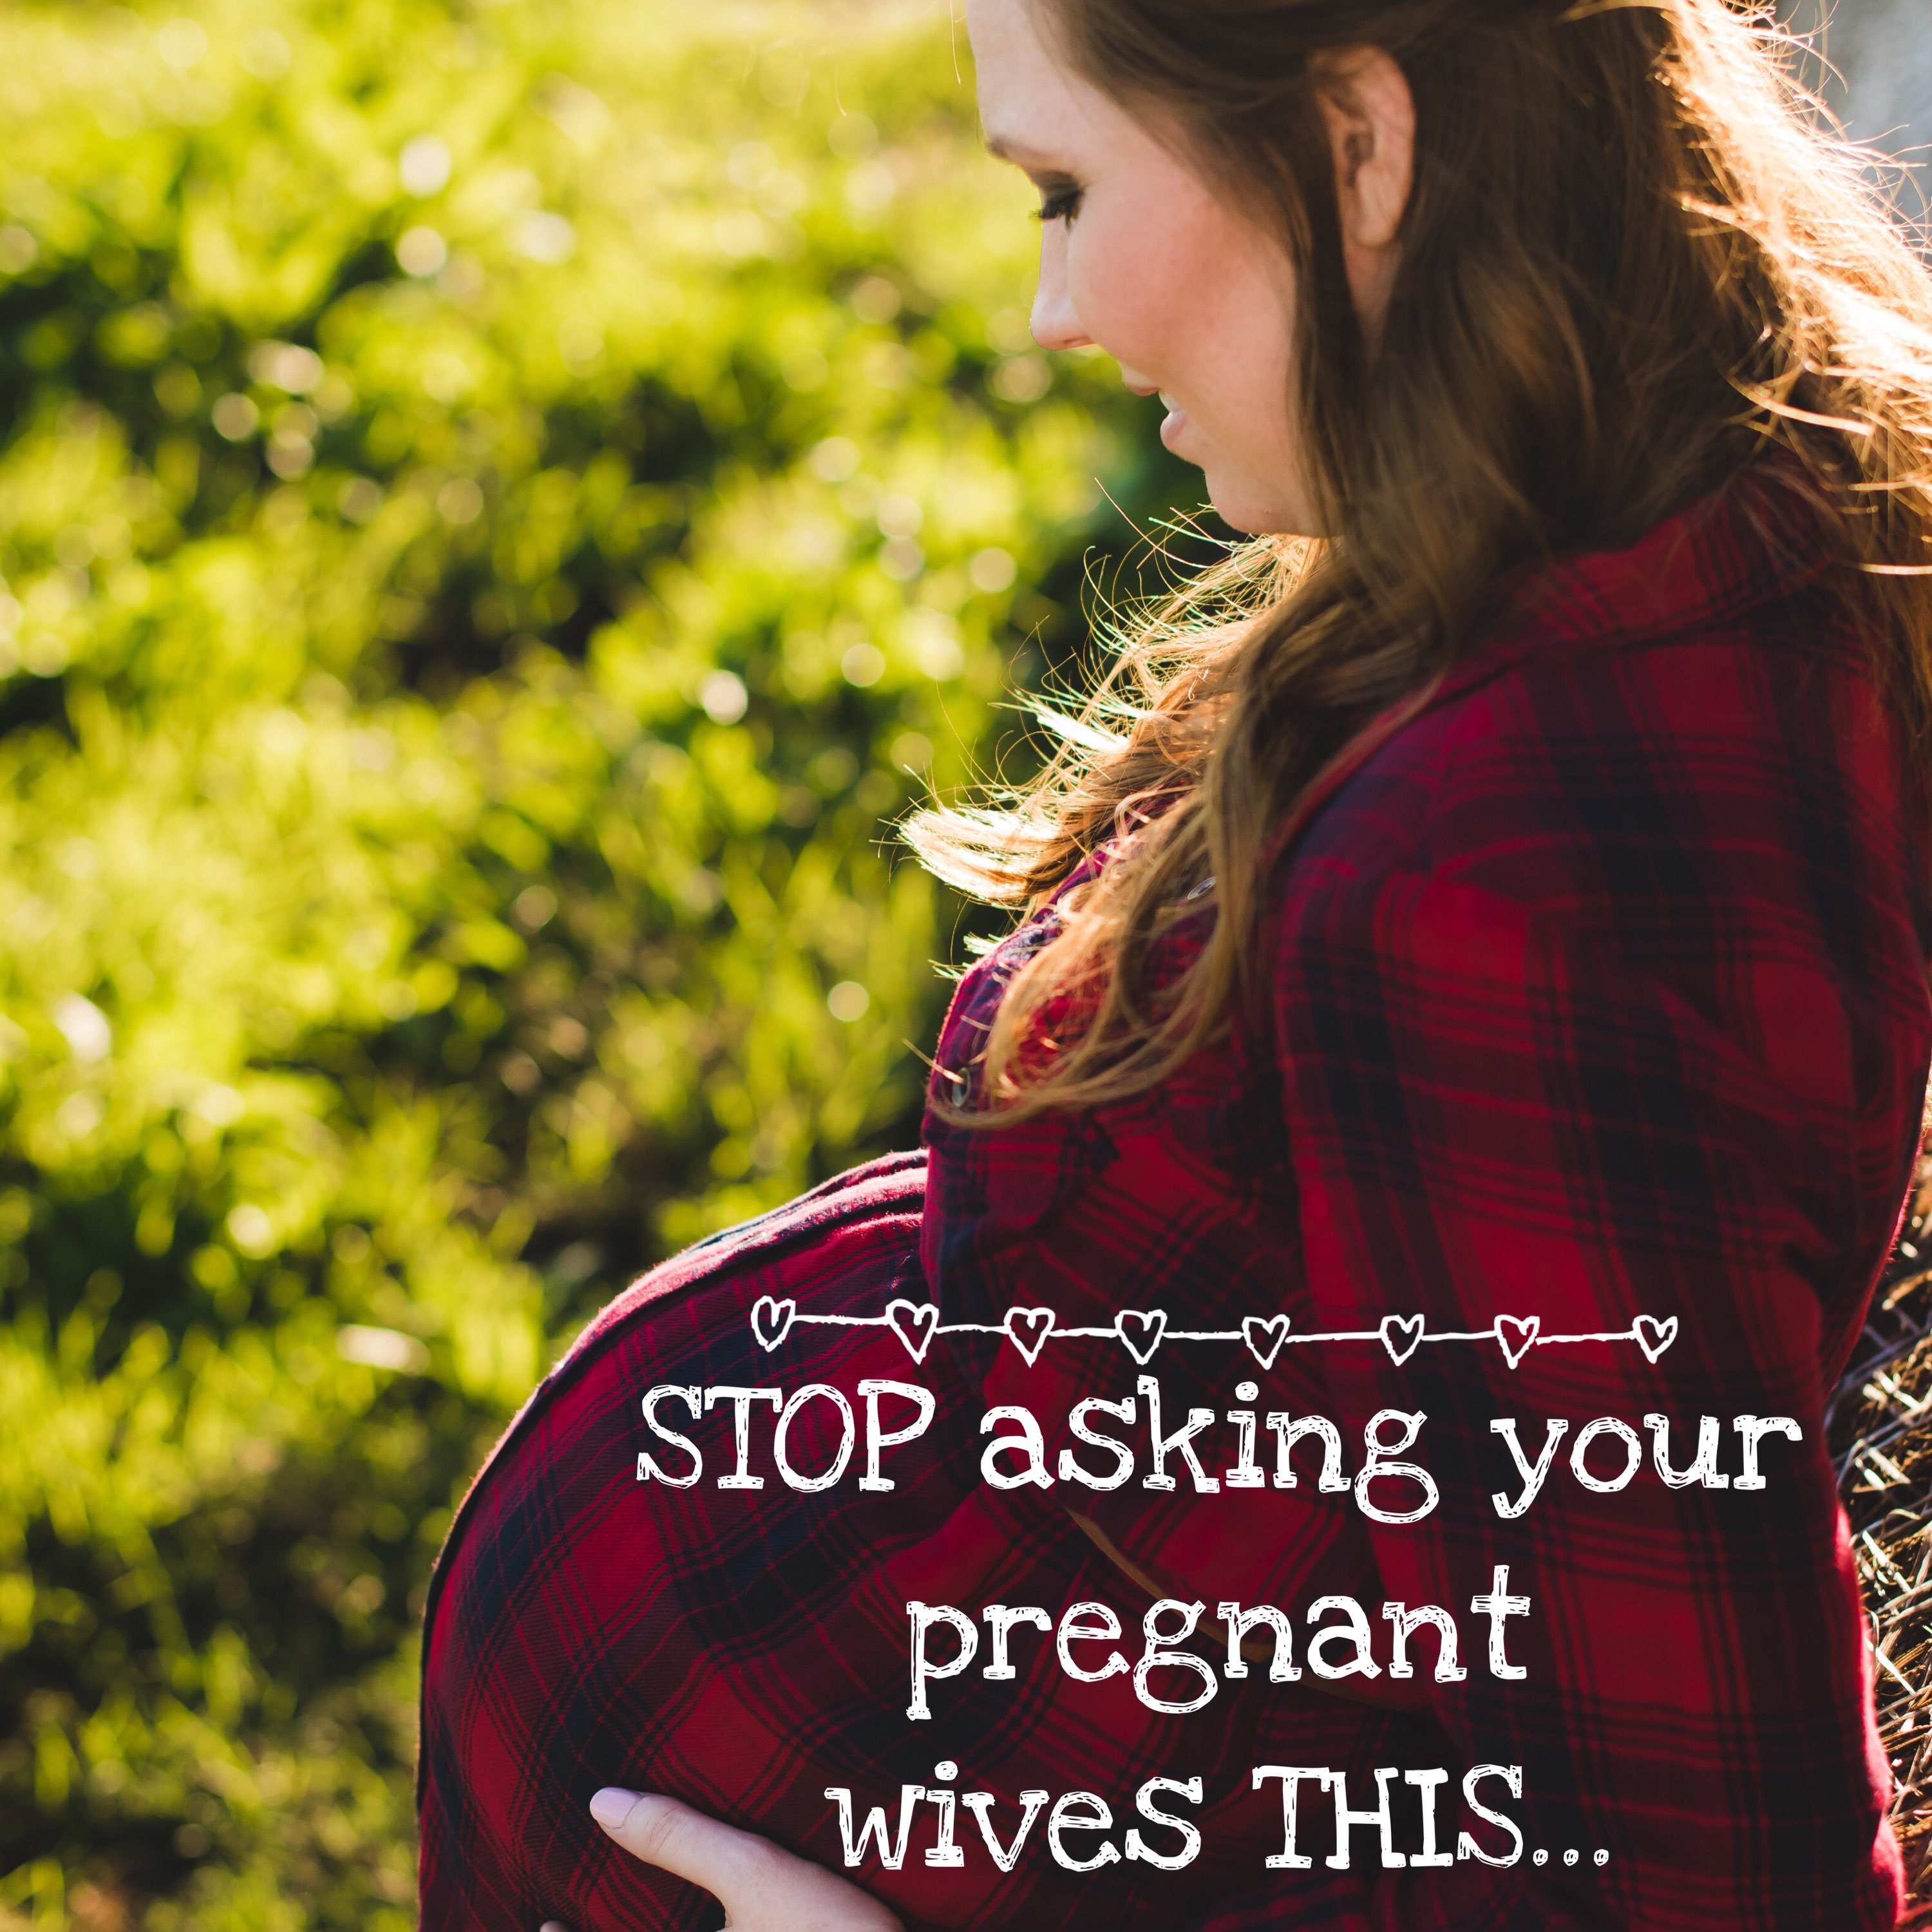 Husbands, Please Immediately Stop Asking Your Wife to Pump